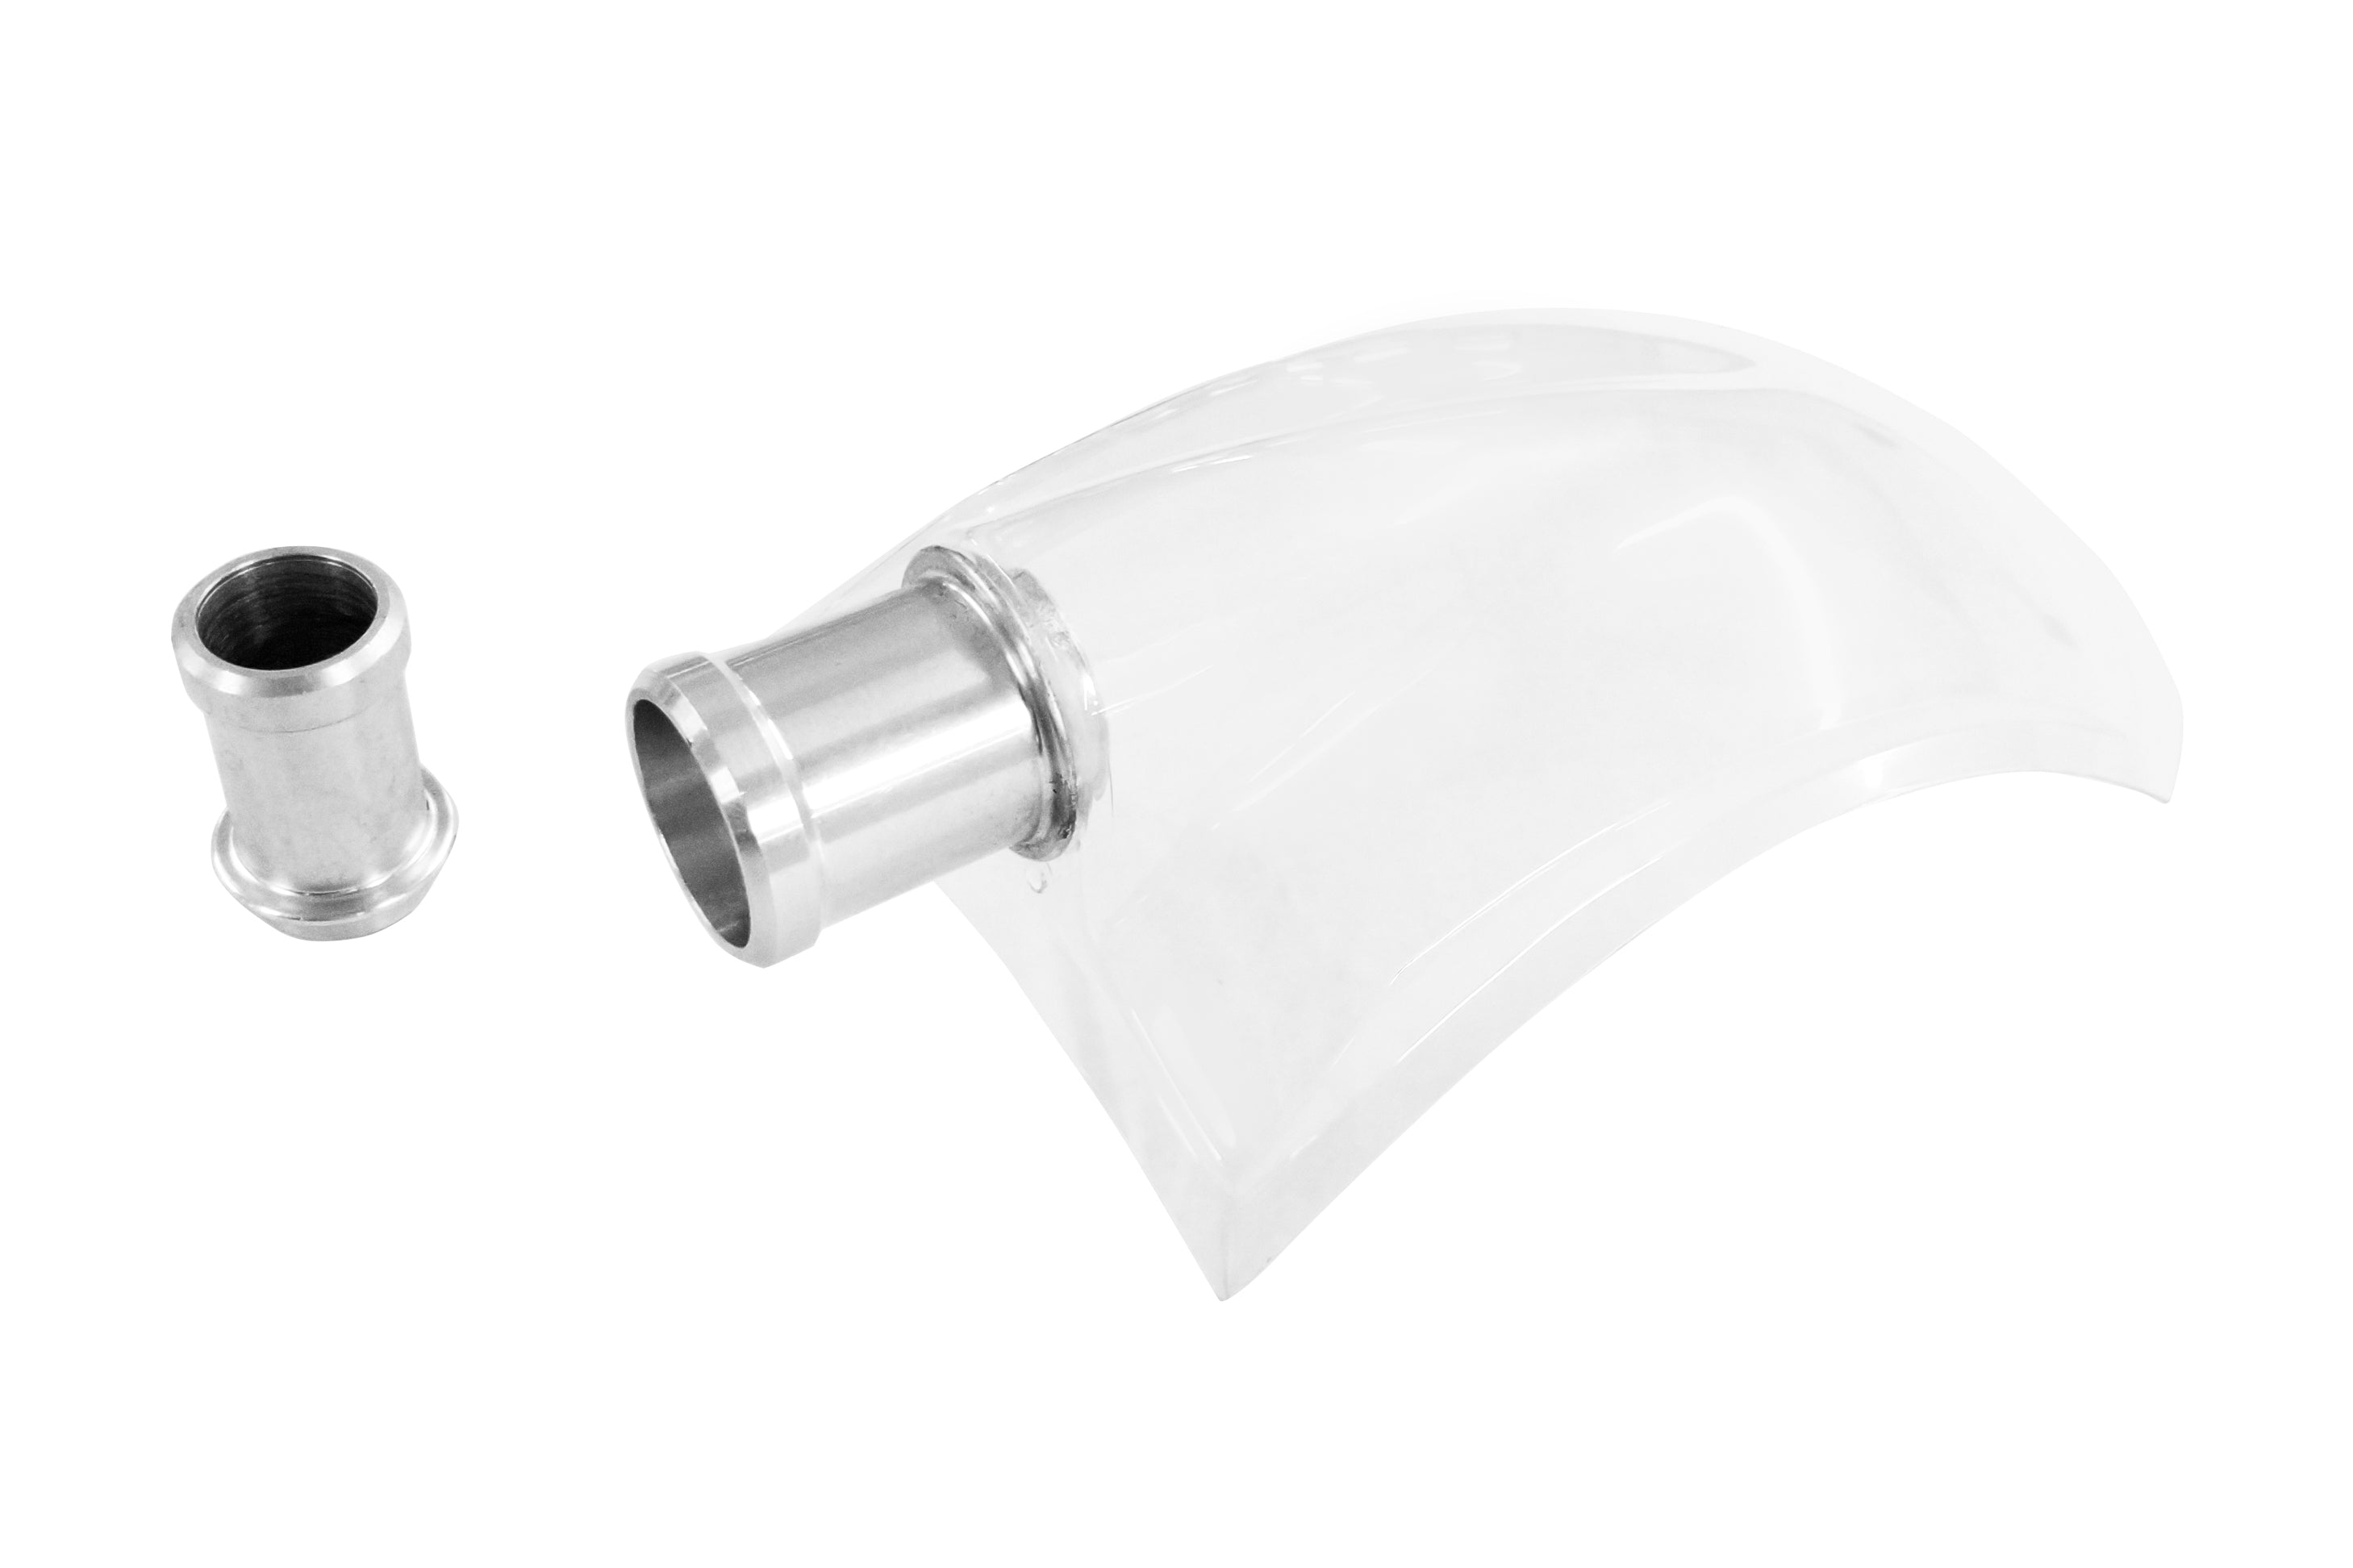 SCHUBERTH 1010008097 Forced air scoop clear - Small Connector Prep. with tape SP1 Photo-1 